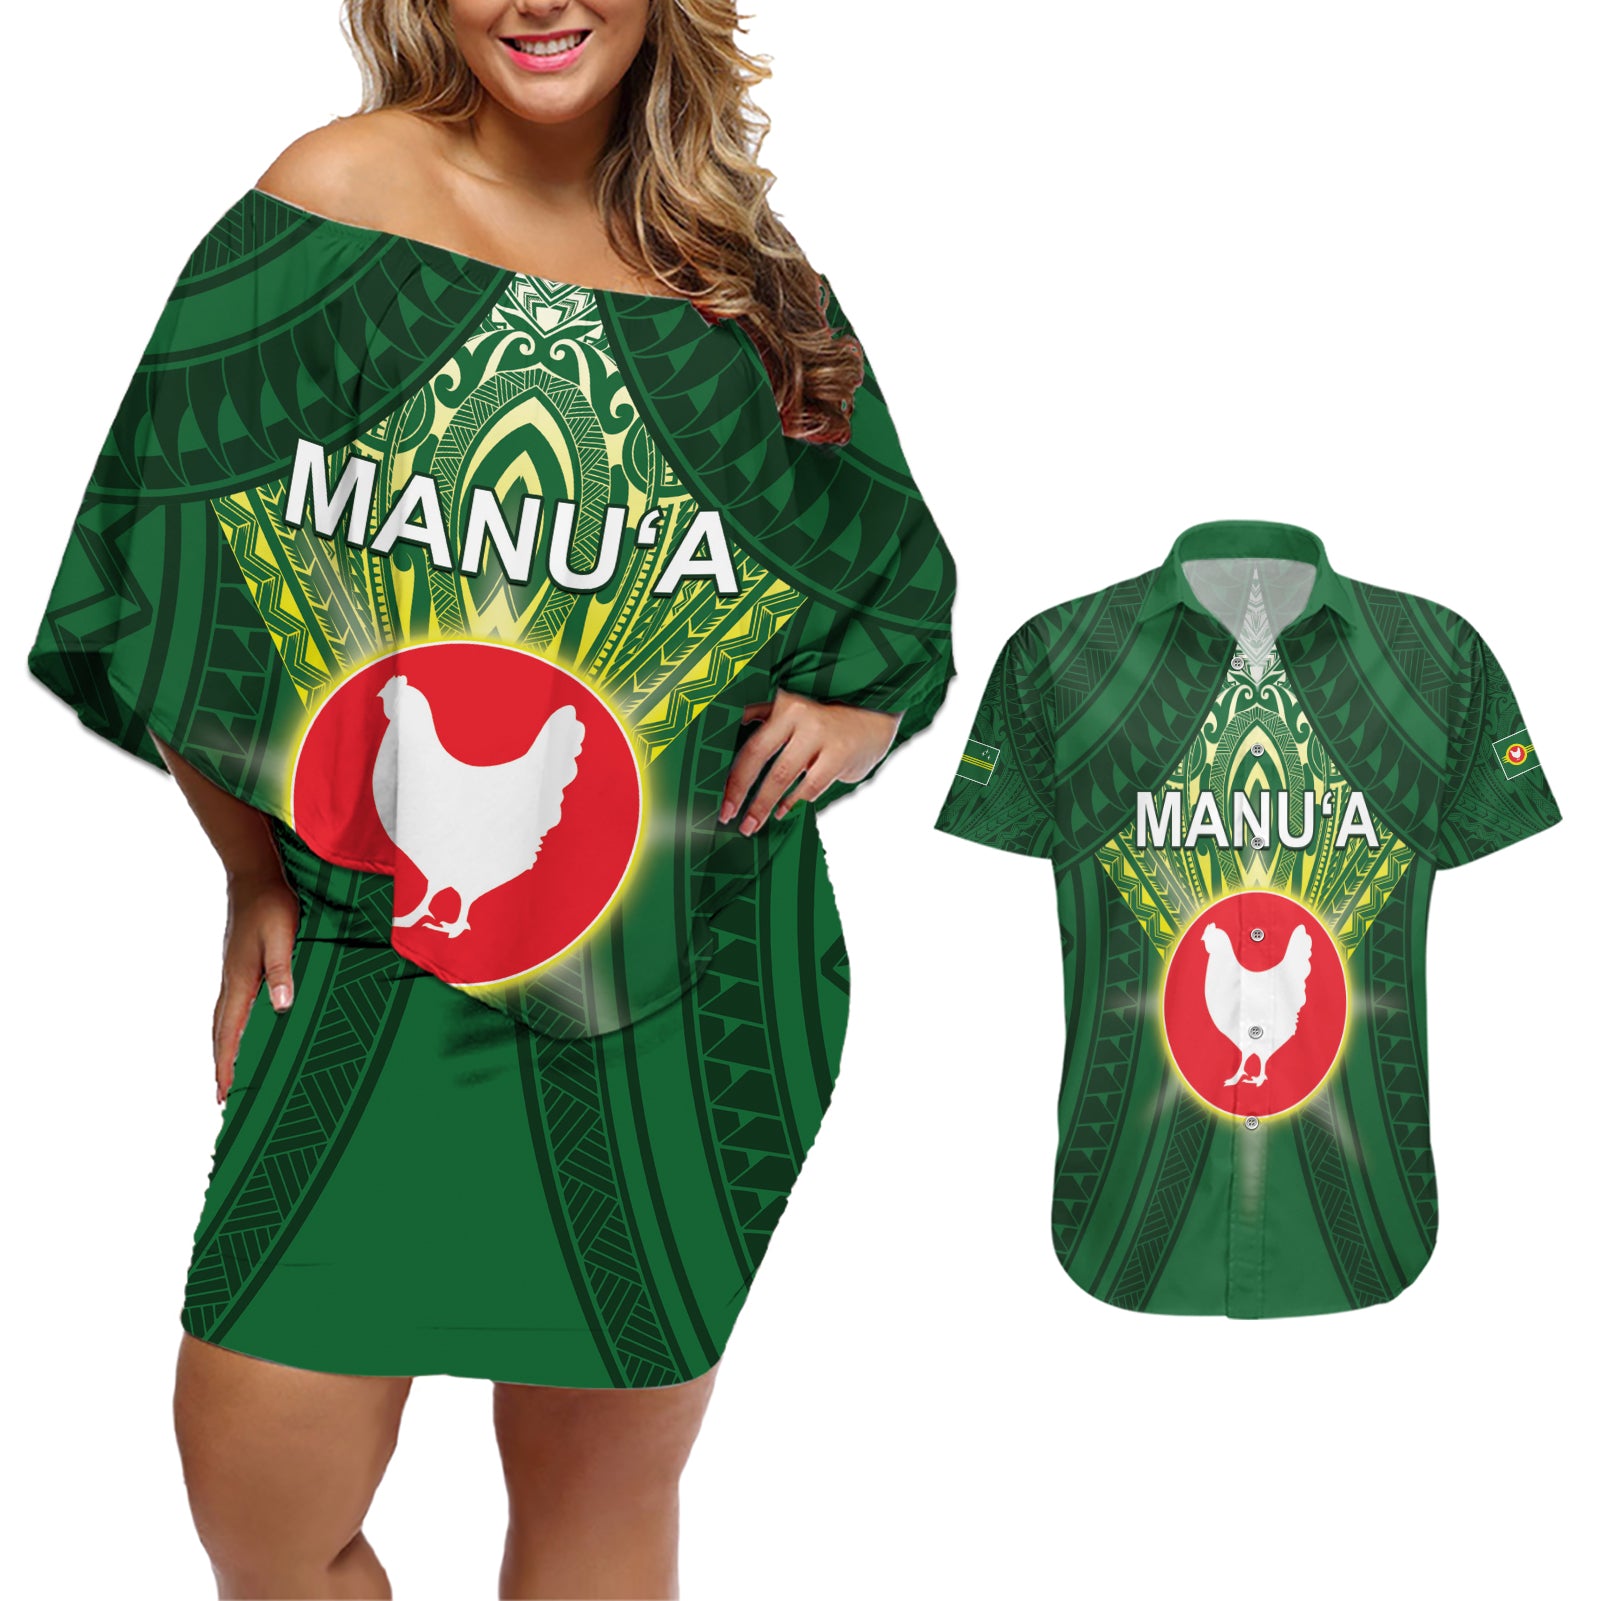 Personalized American Samoa Manu'a Cession Day Couples Matching Off Shoulder Short Dress and Hawaiian Shirt With Polynesian Pattern